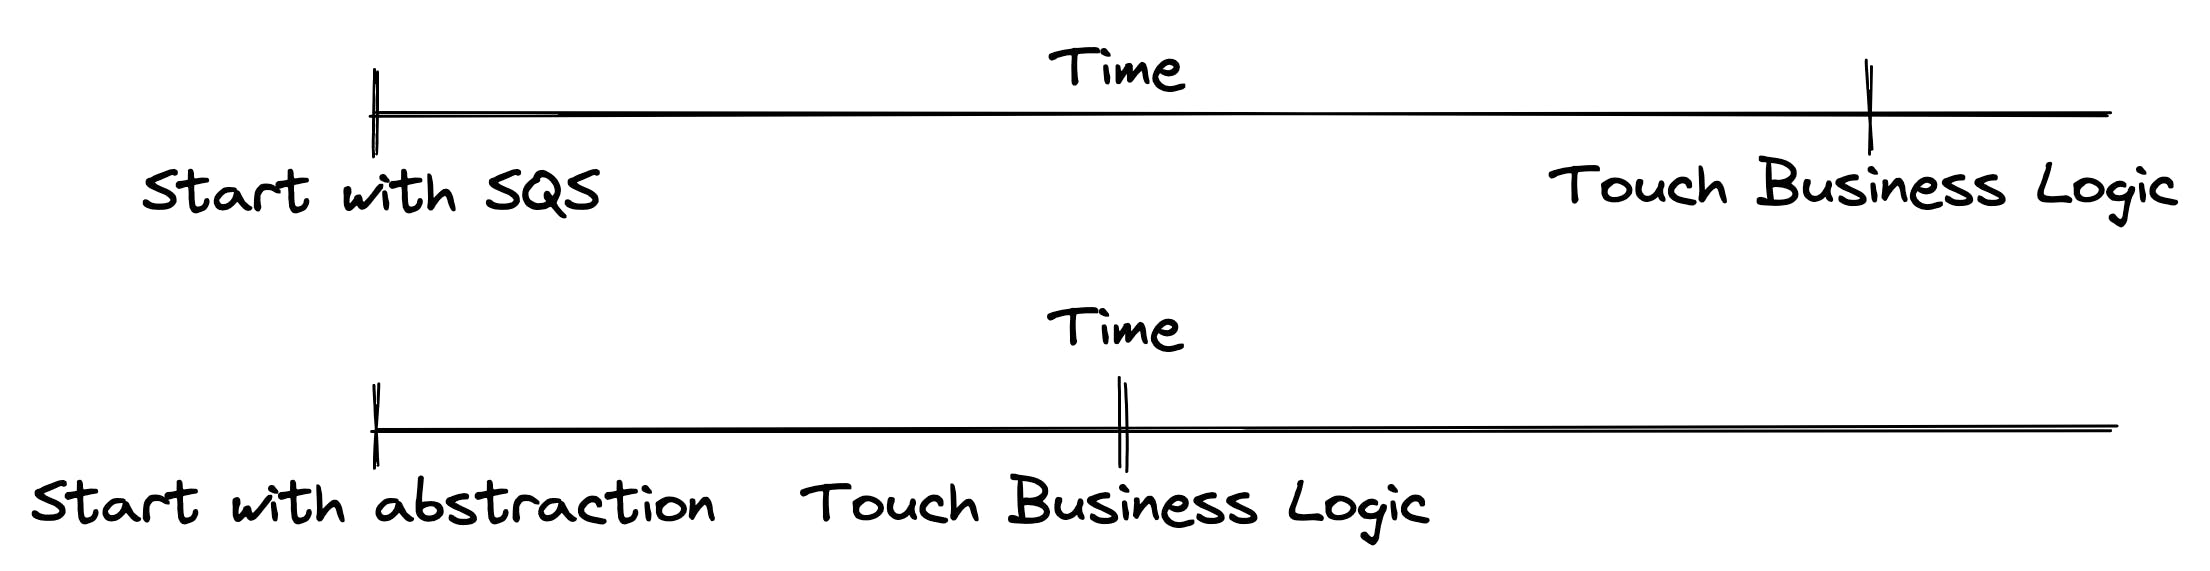 Time till you touch business logic